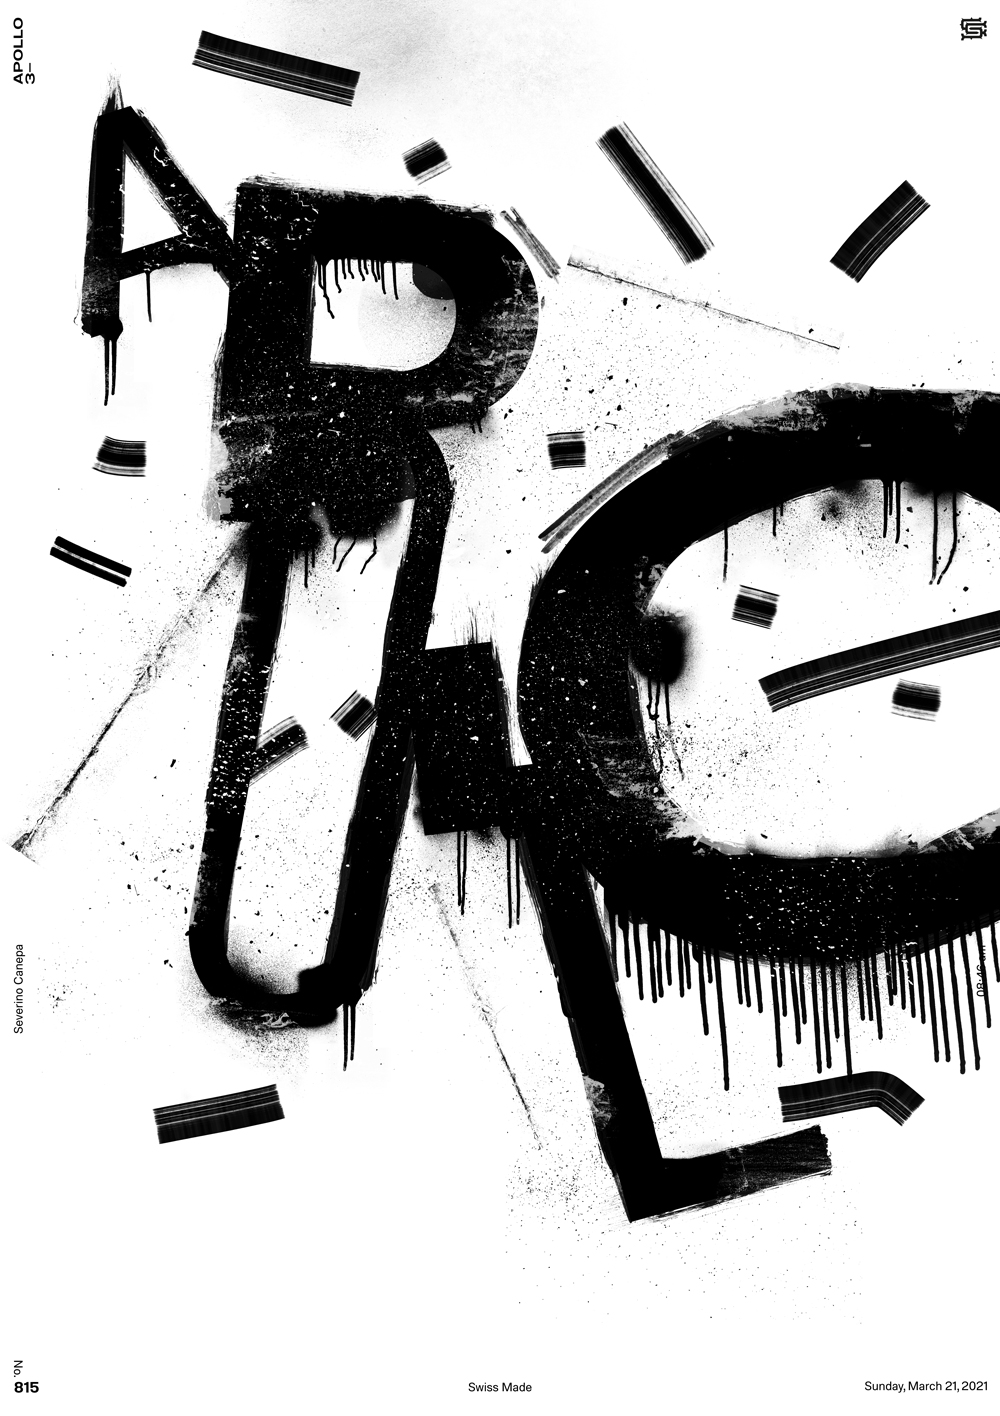 Typographic graphic creation made with dirty and spray-paint brush in Photoshop